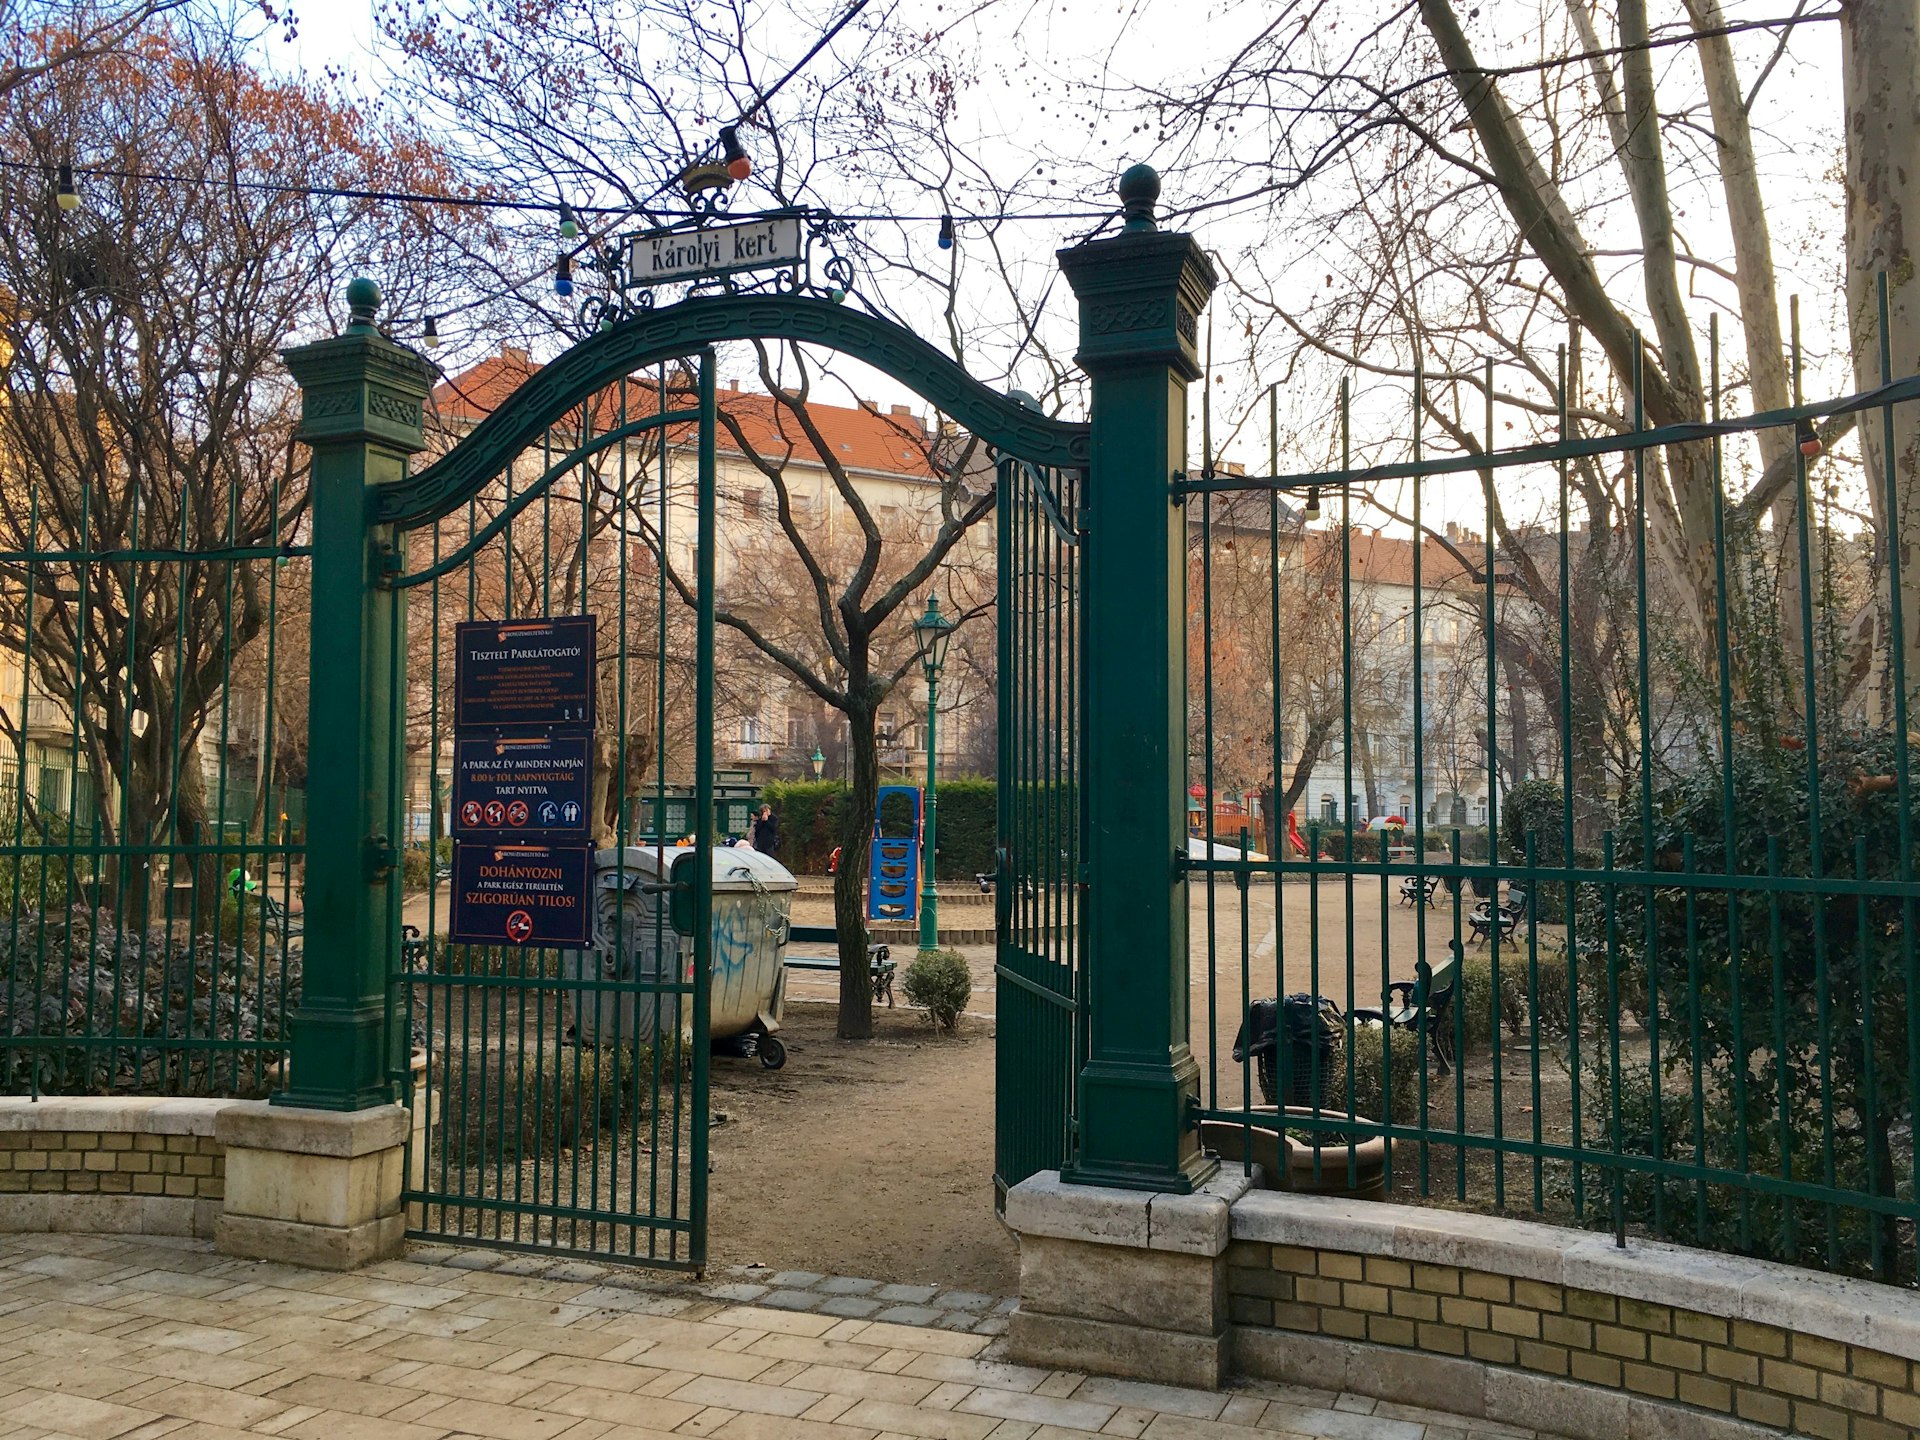 One of the front wrought-iron gates is ajar at Károly Garden, Budapest, Hungary